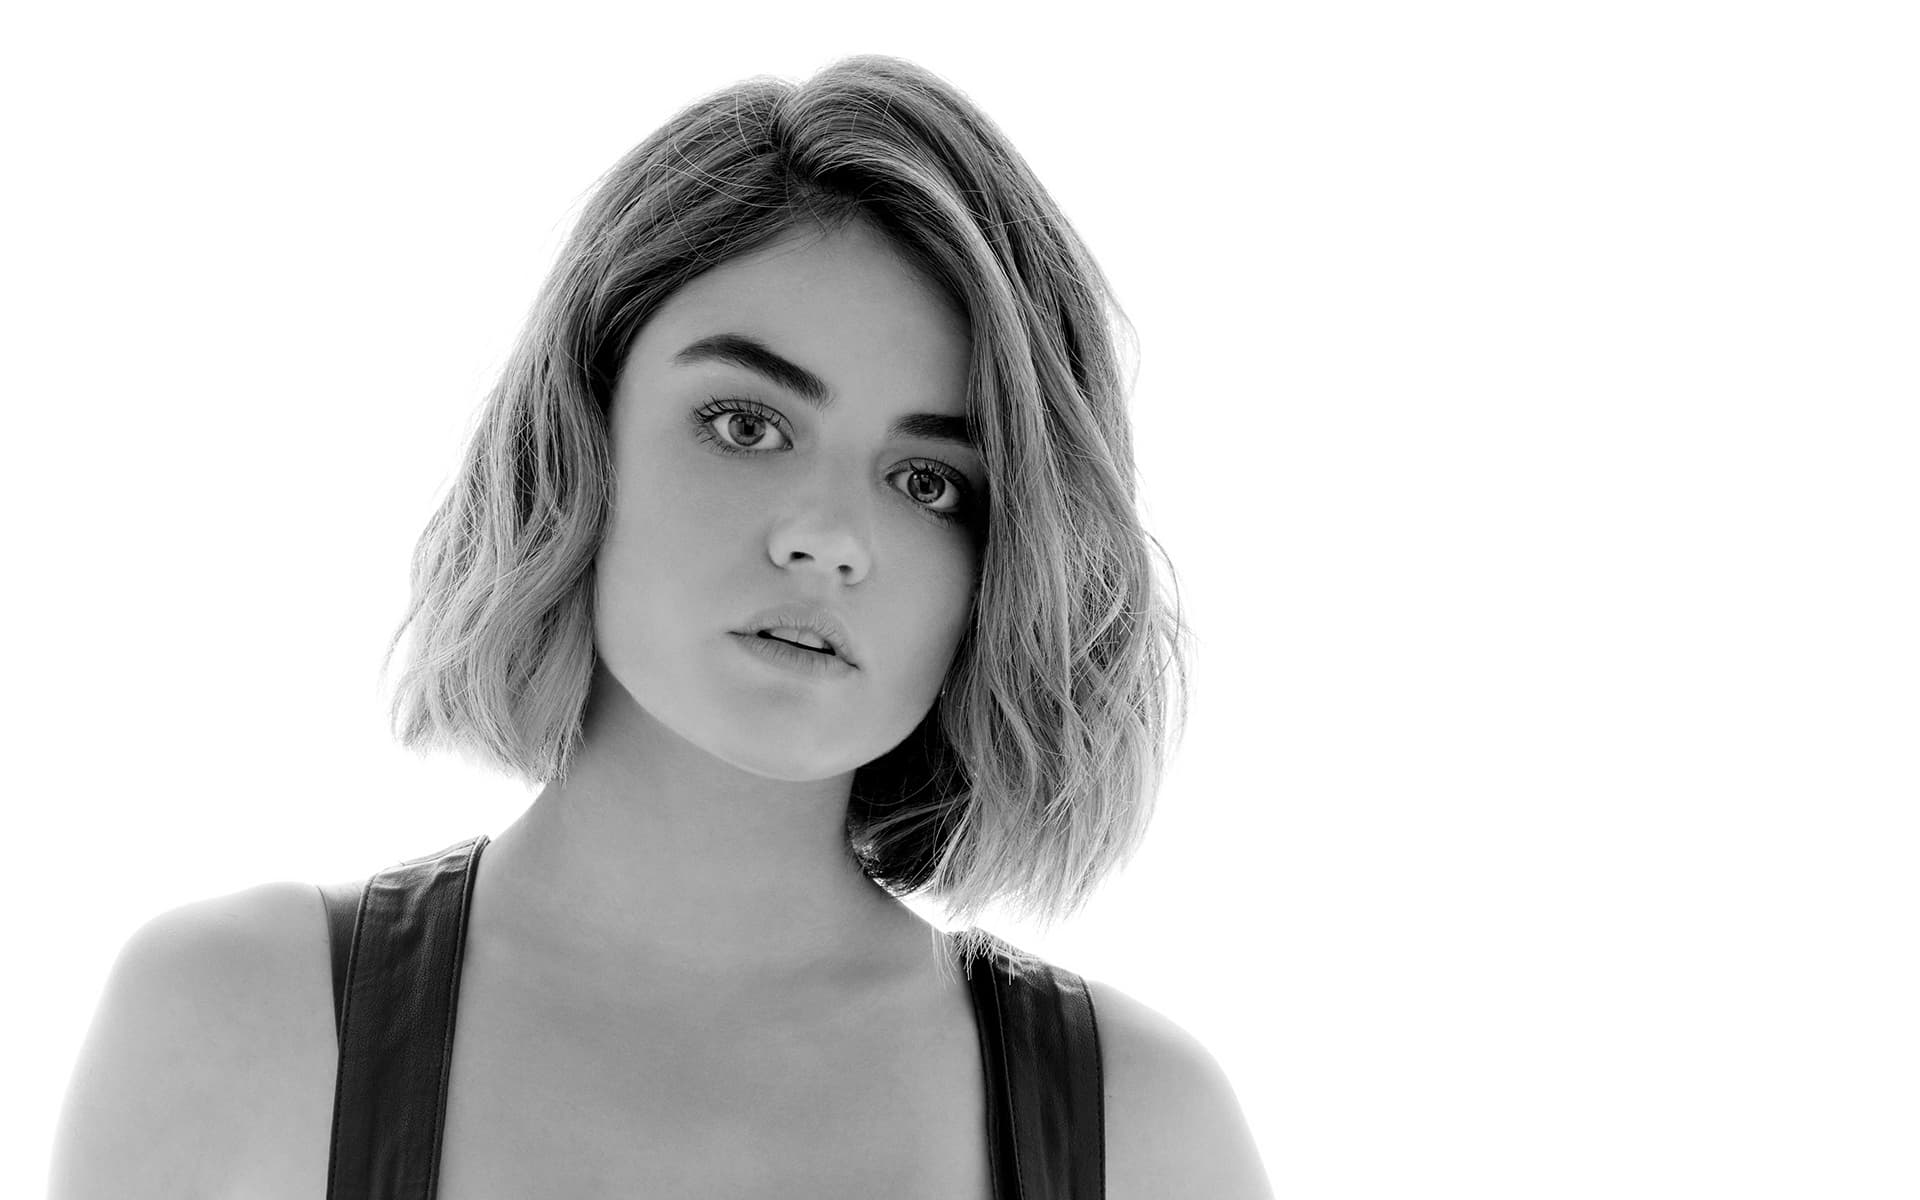 Actress Black Amp White Lucy Hale Singer 1920x1200